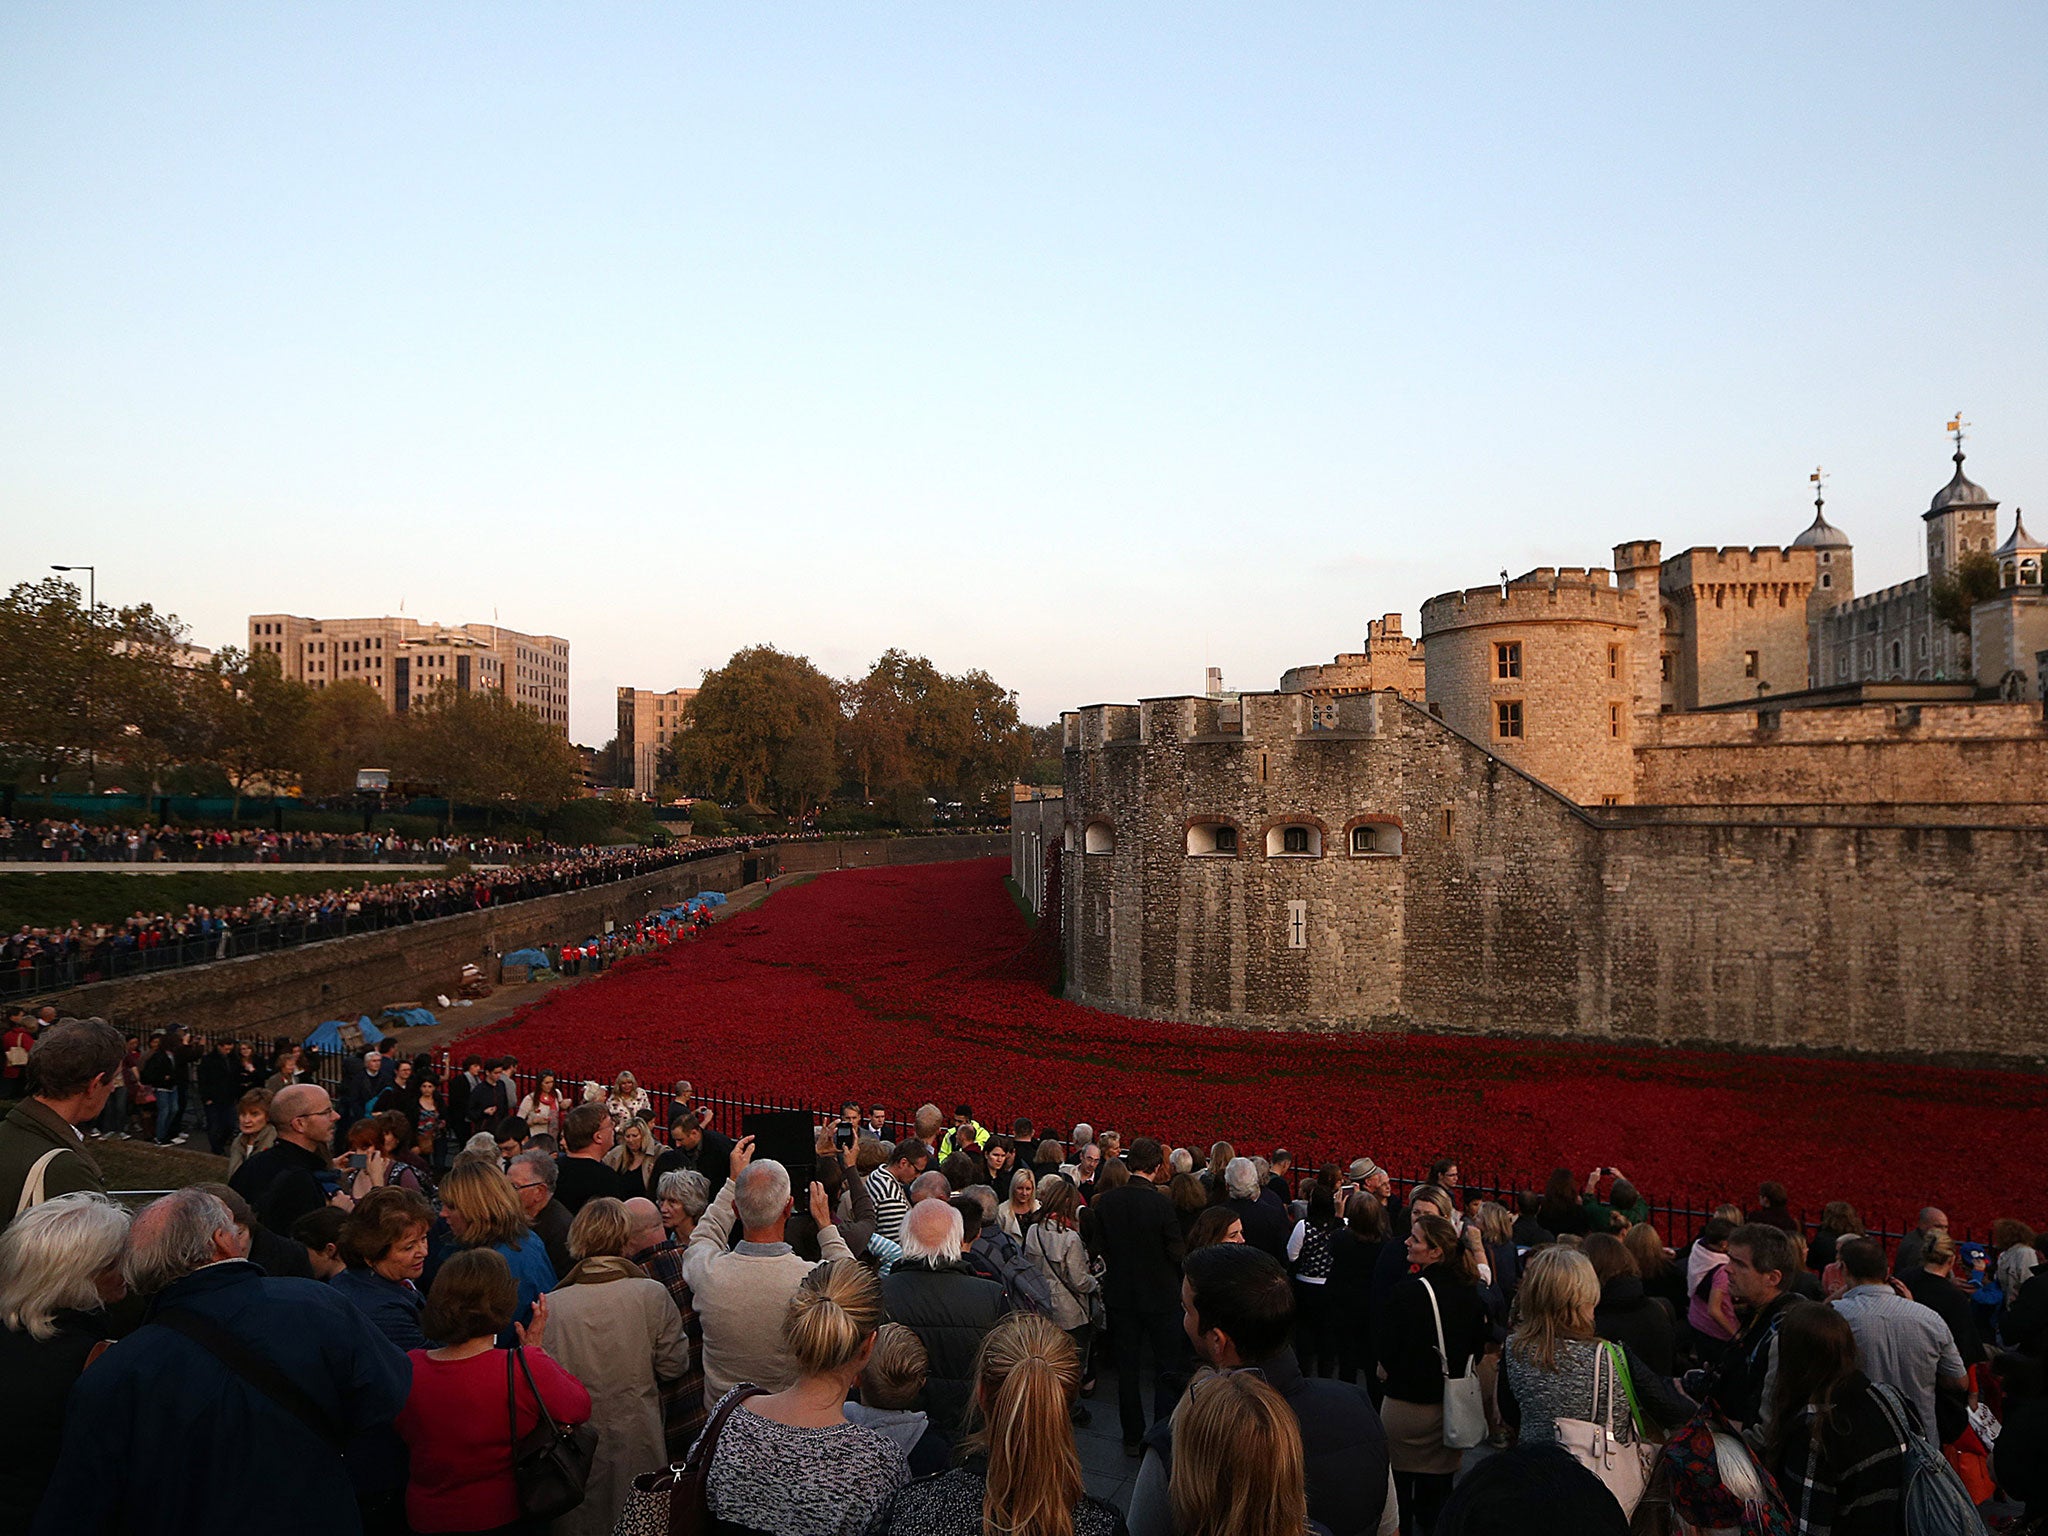 Tens of thousands of people have flocked to see the Tower of London poppies